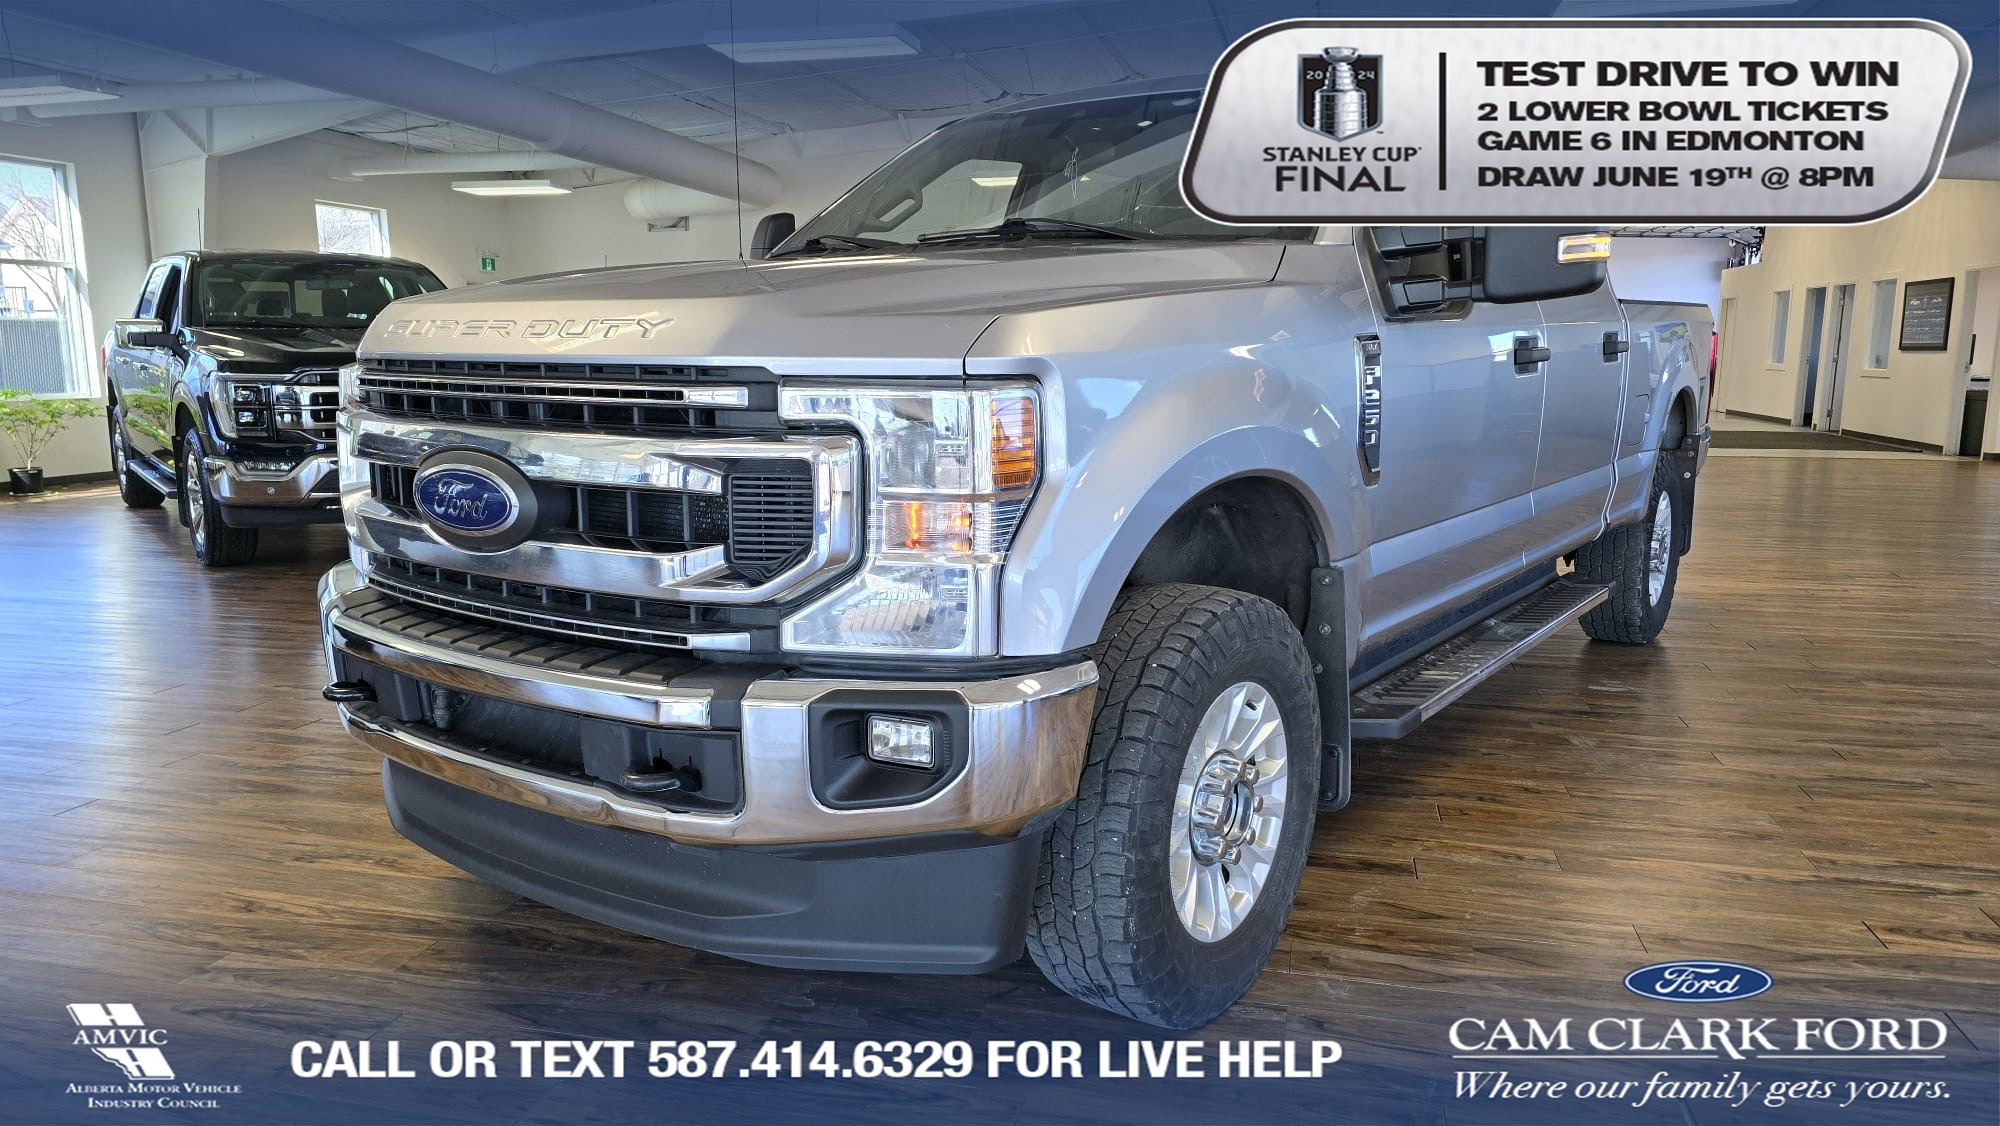 2020 Ford F-250 XLT GAS | FULLY INSPECTED | CLEAN EXTERIOR